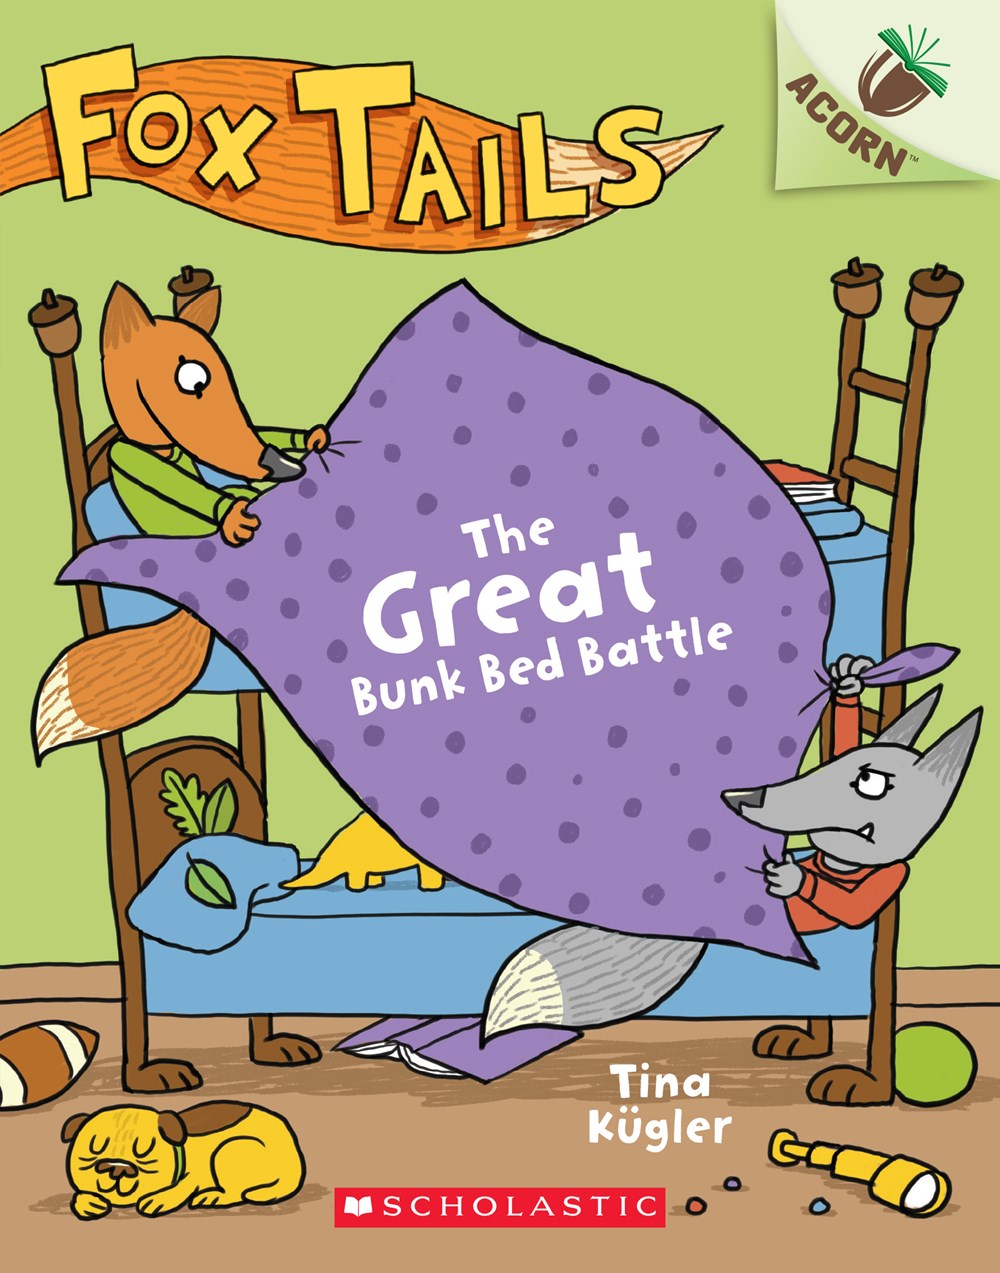 The Great Bunk Bed Battle (Fox Tails #1)